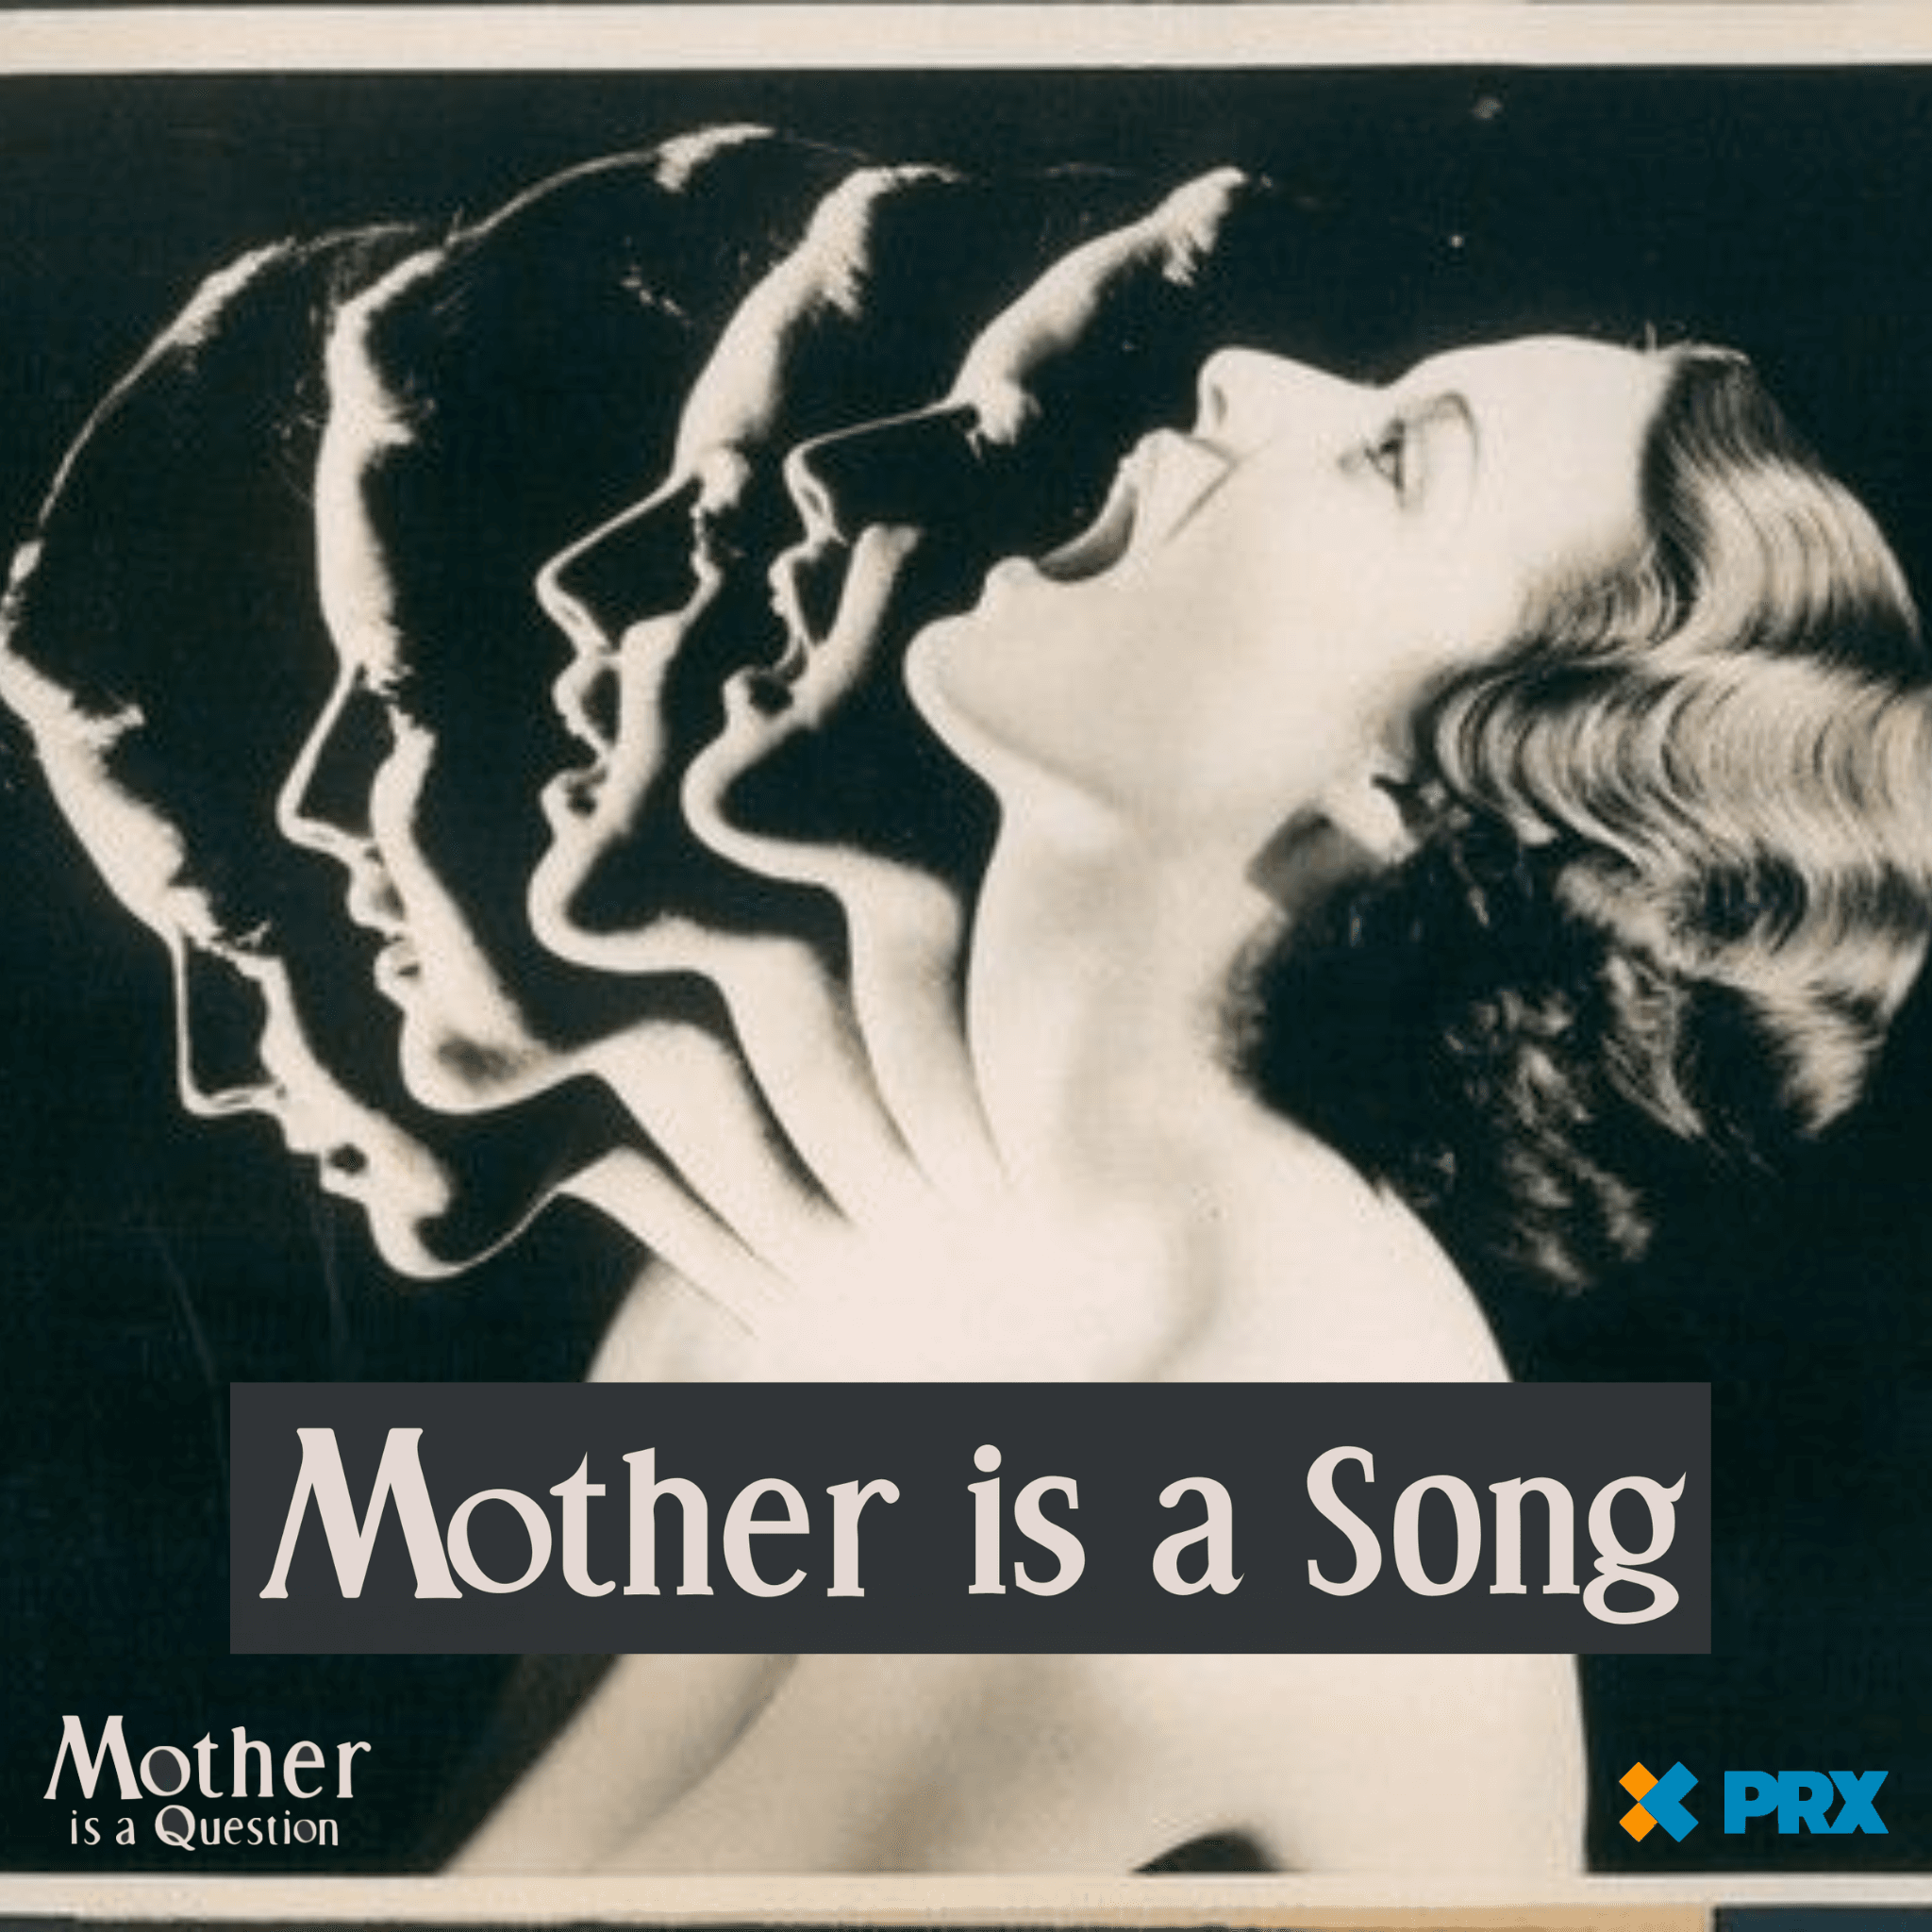 Thumbnail for "Mother is a Song".